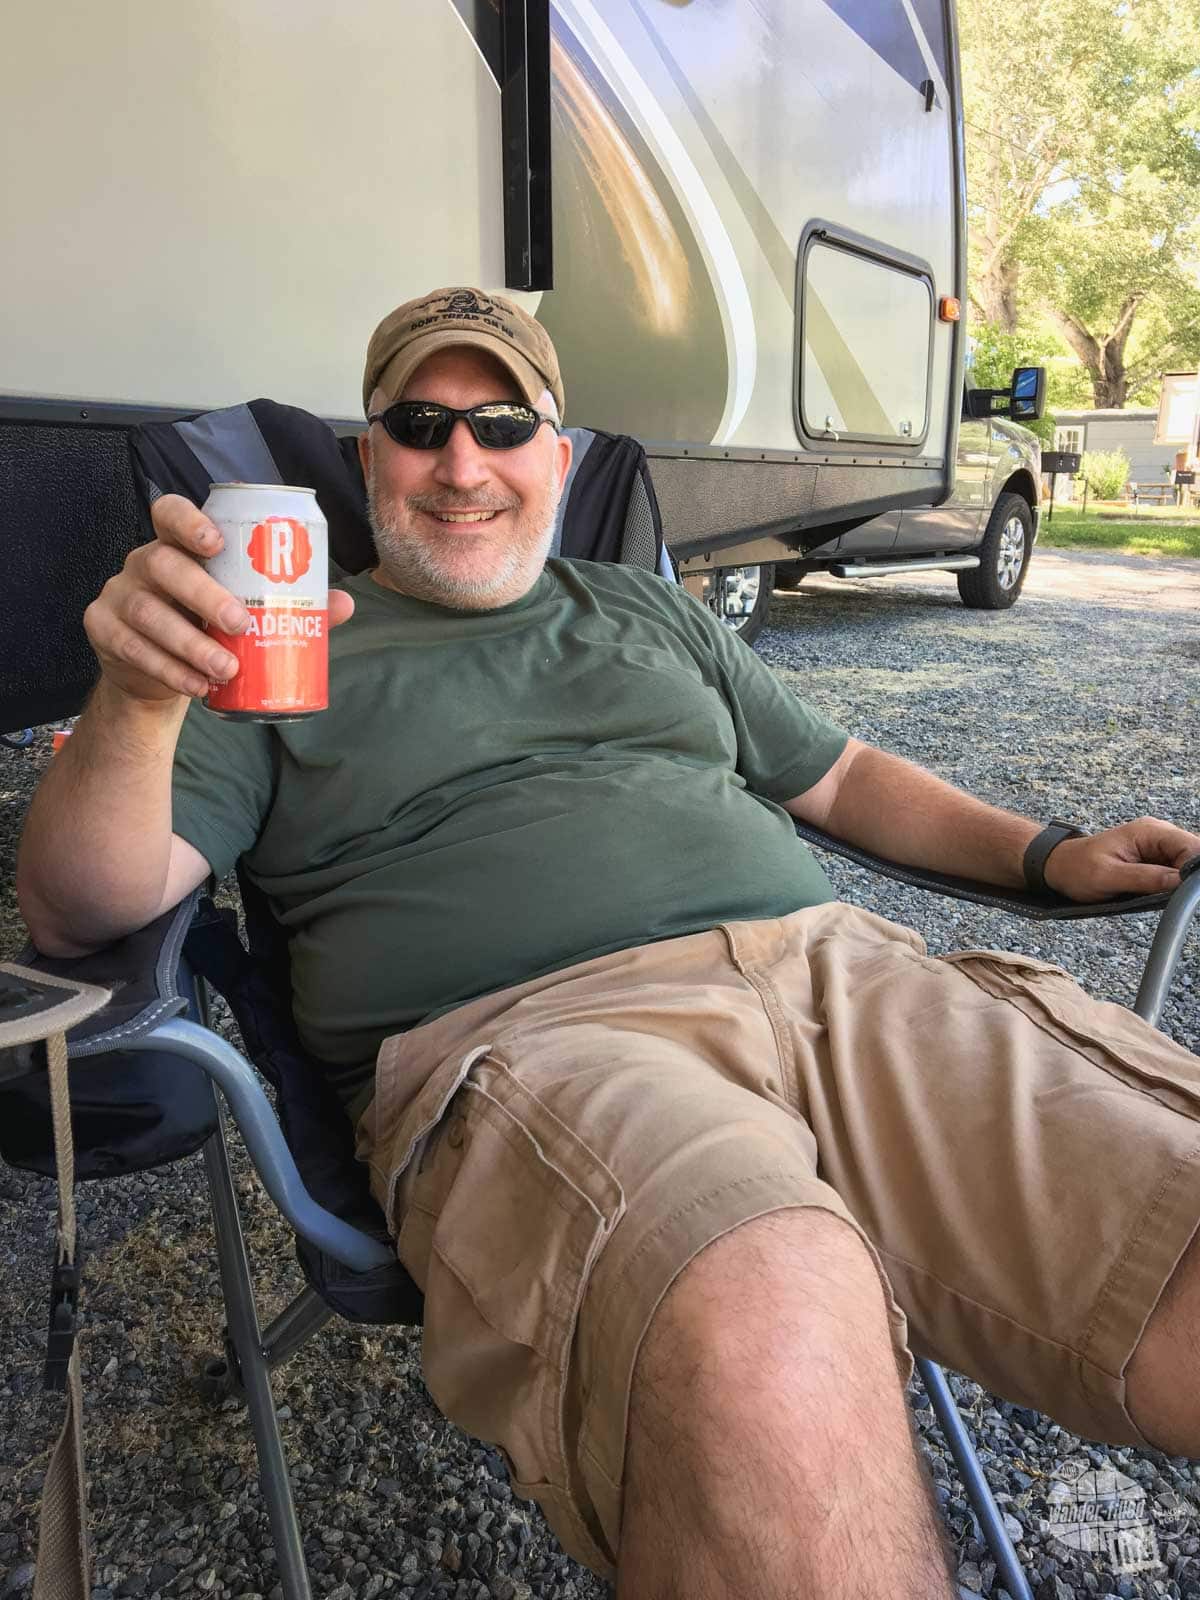 Grant relaxing with a beer after getting everything set up at the campsite on a hot afternoon.